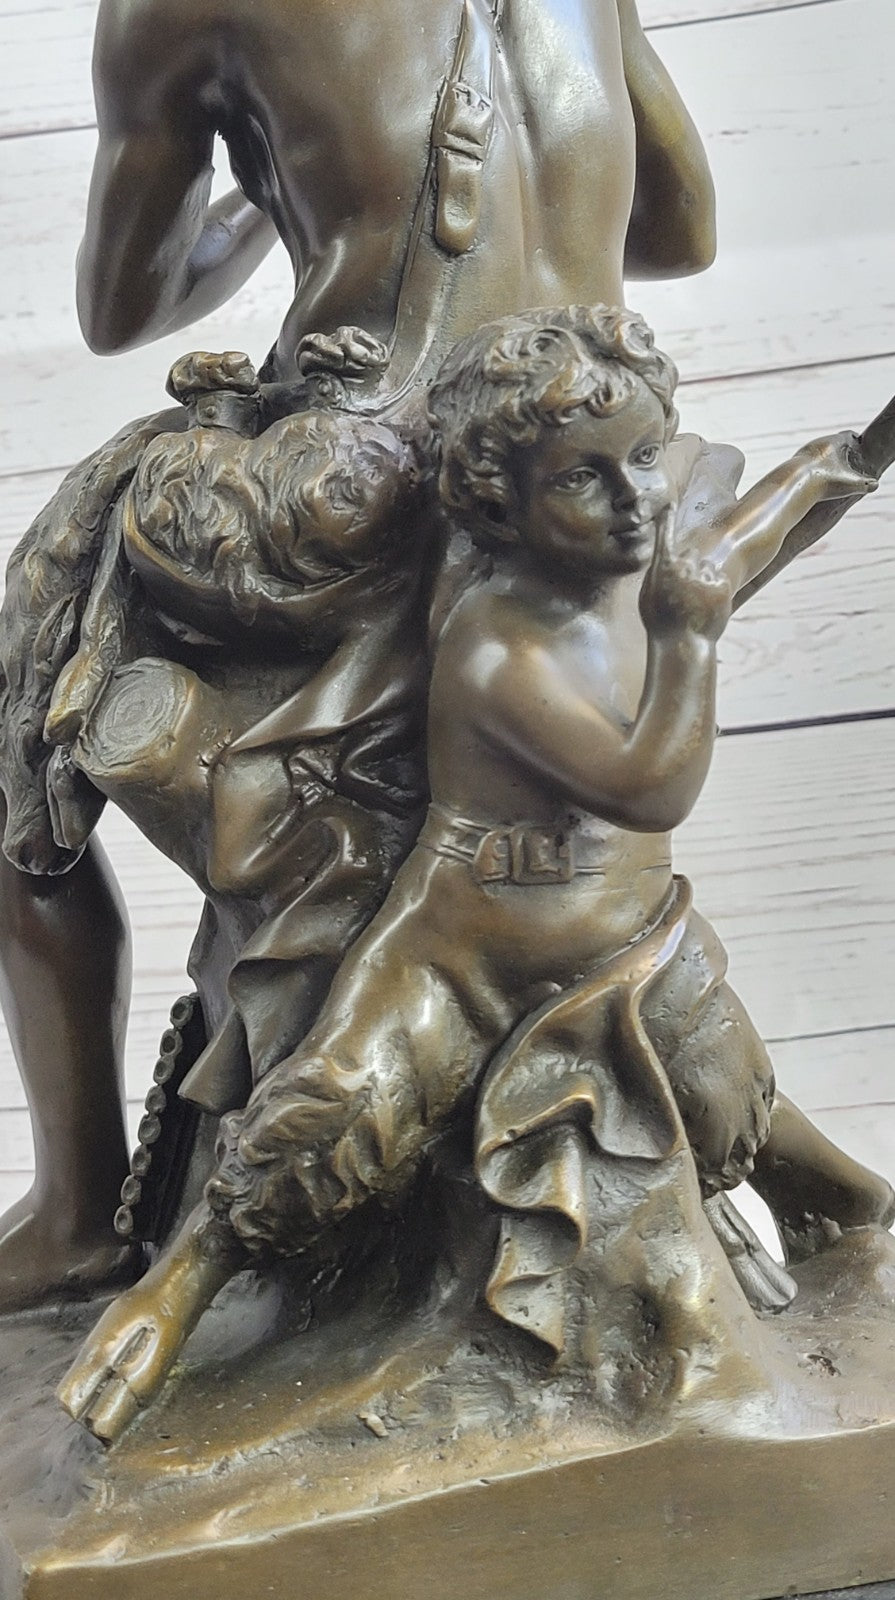 Genuine Bronze Statue - Shepherd and Satyr Boy Sculpture by Pan and Infant Faun